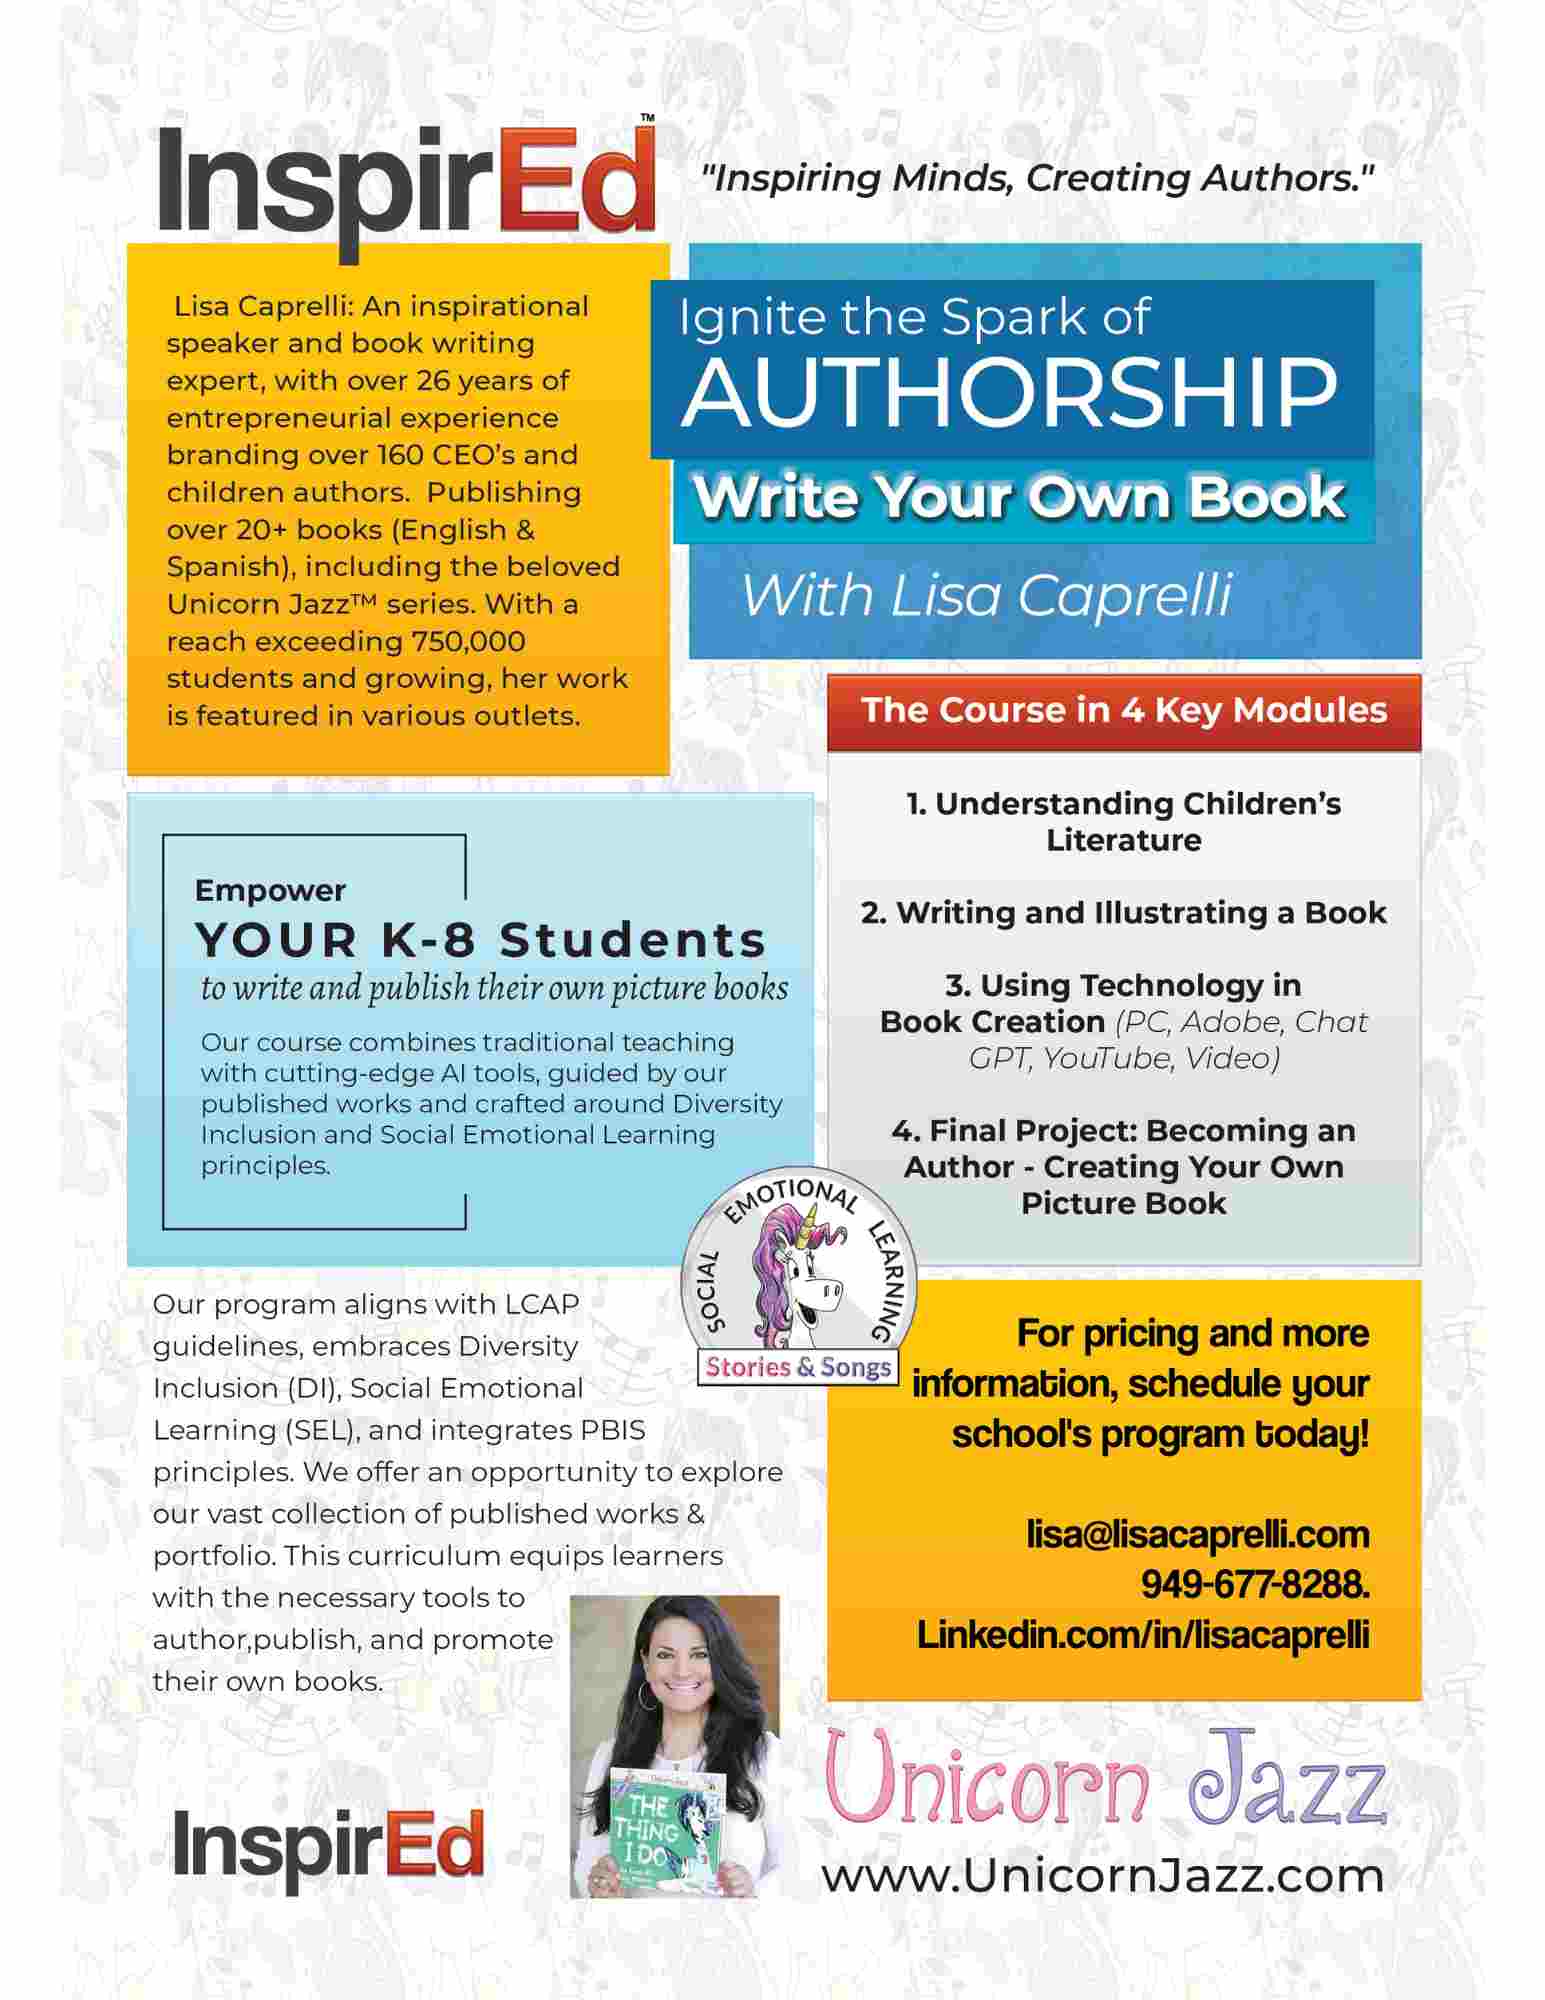 Write Your Own Book workshops by Lisa Caprelli